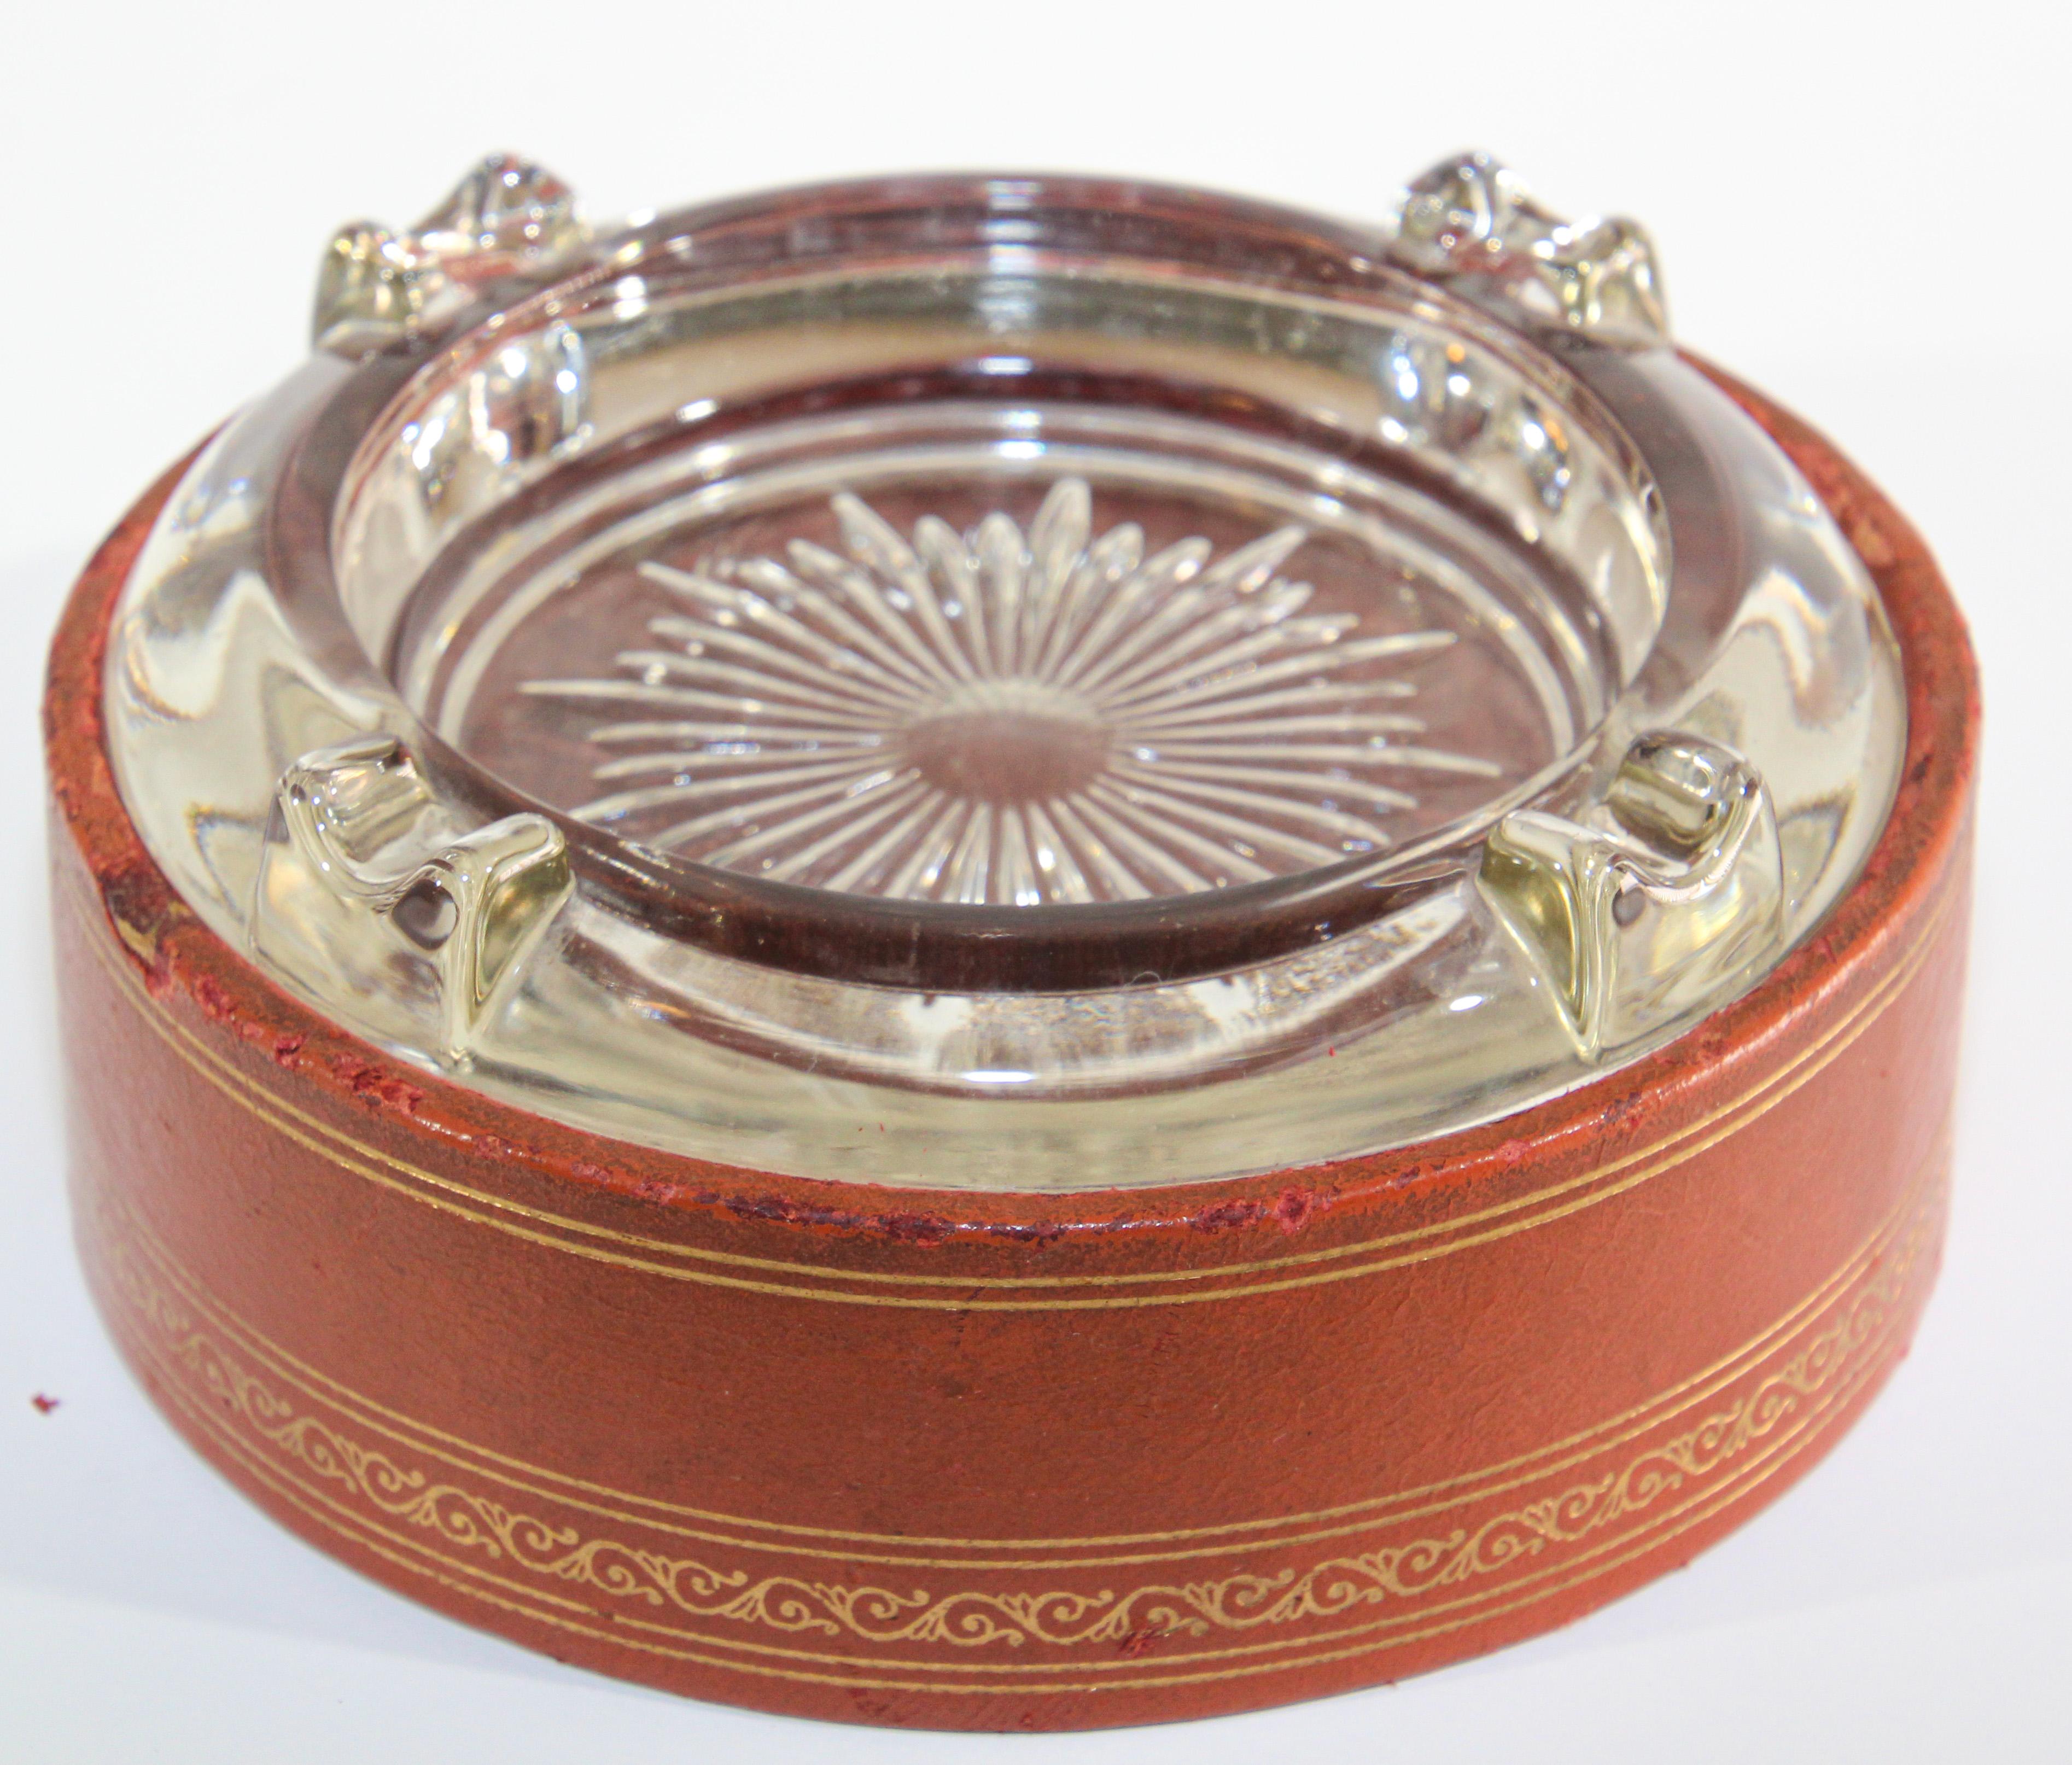 Vintage beautiful Italian 1950s design, leather and glass 2 pieces ashtray.
Leather base with a glass insert ashtray.
Gorgeous from any angle and makes a great addition to any barware set, wonderful decorative object, round shape, a perfect